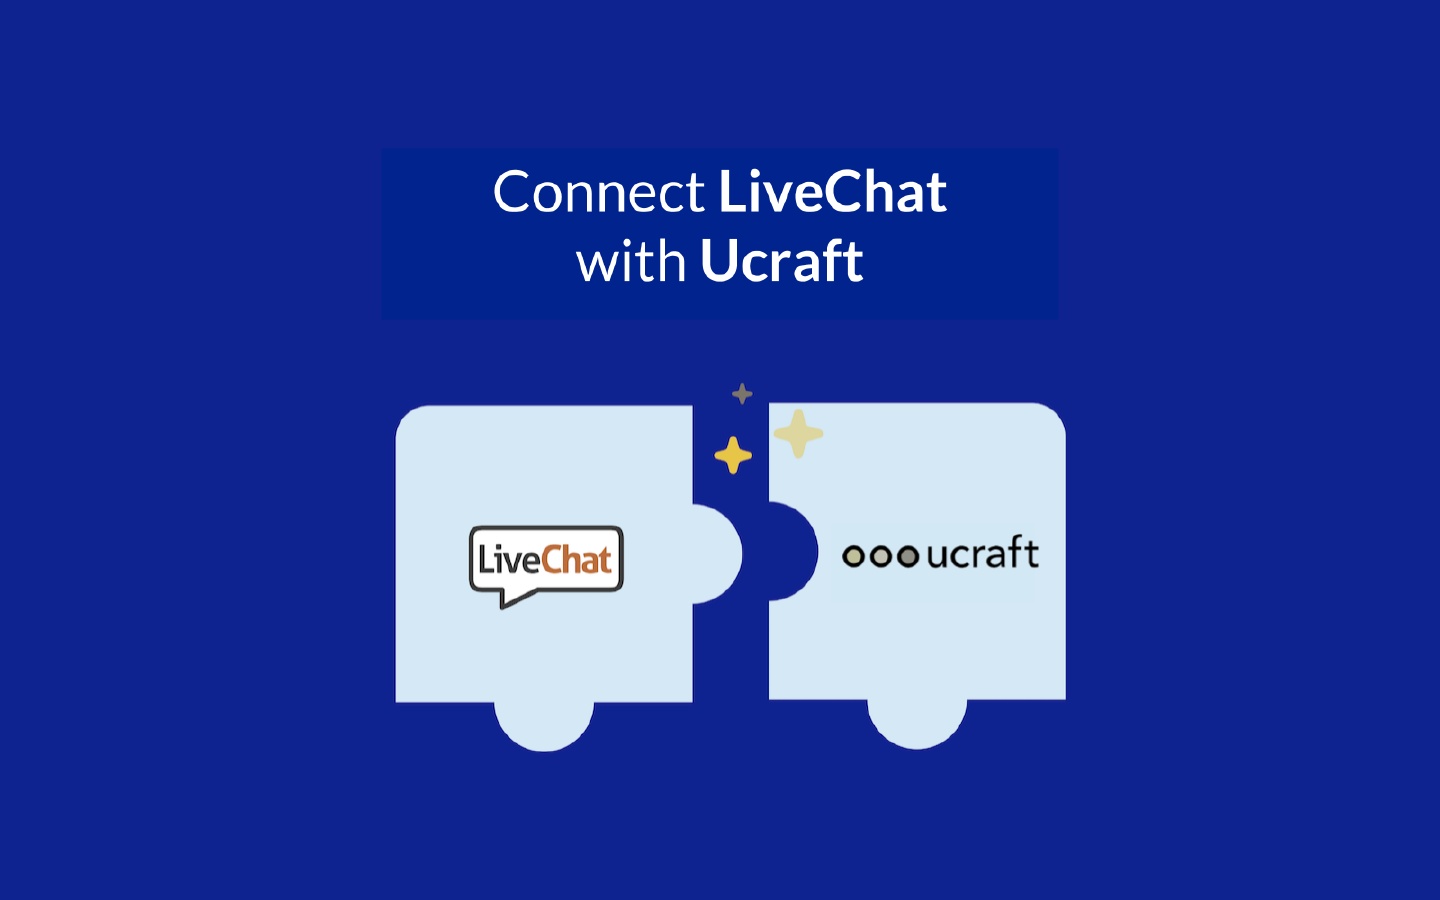 LiveChat and Ucraft